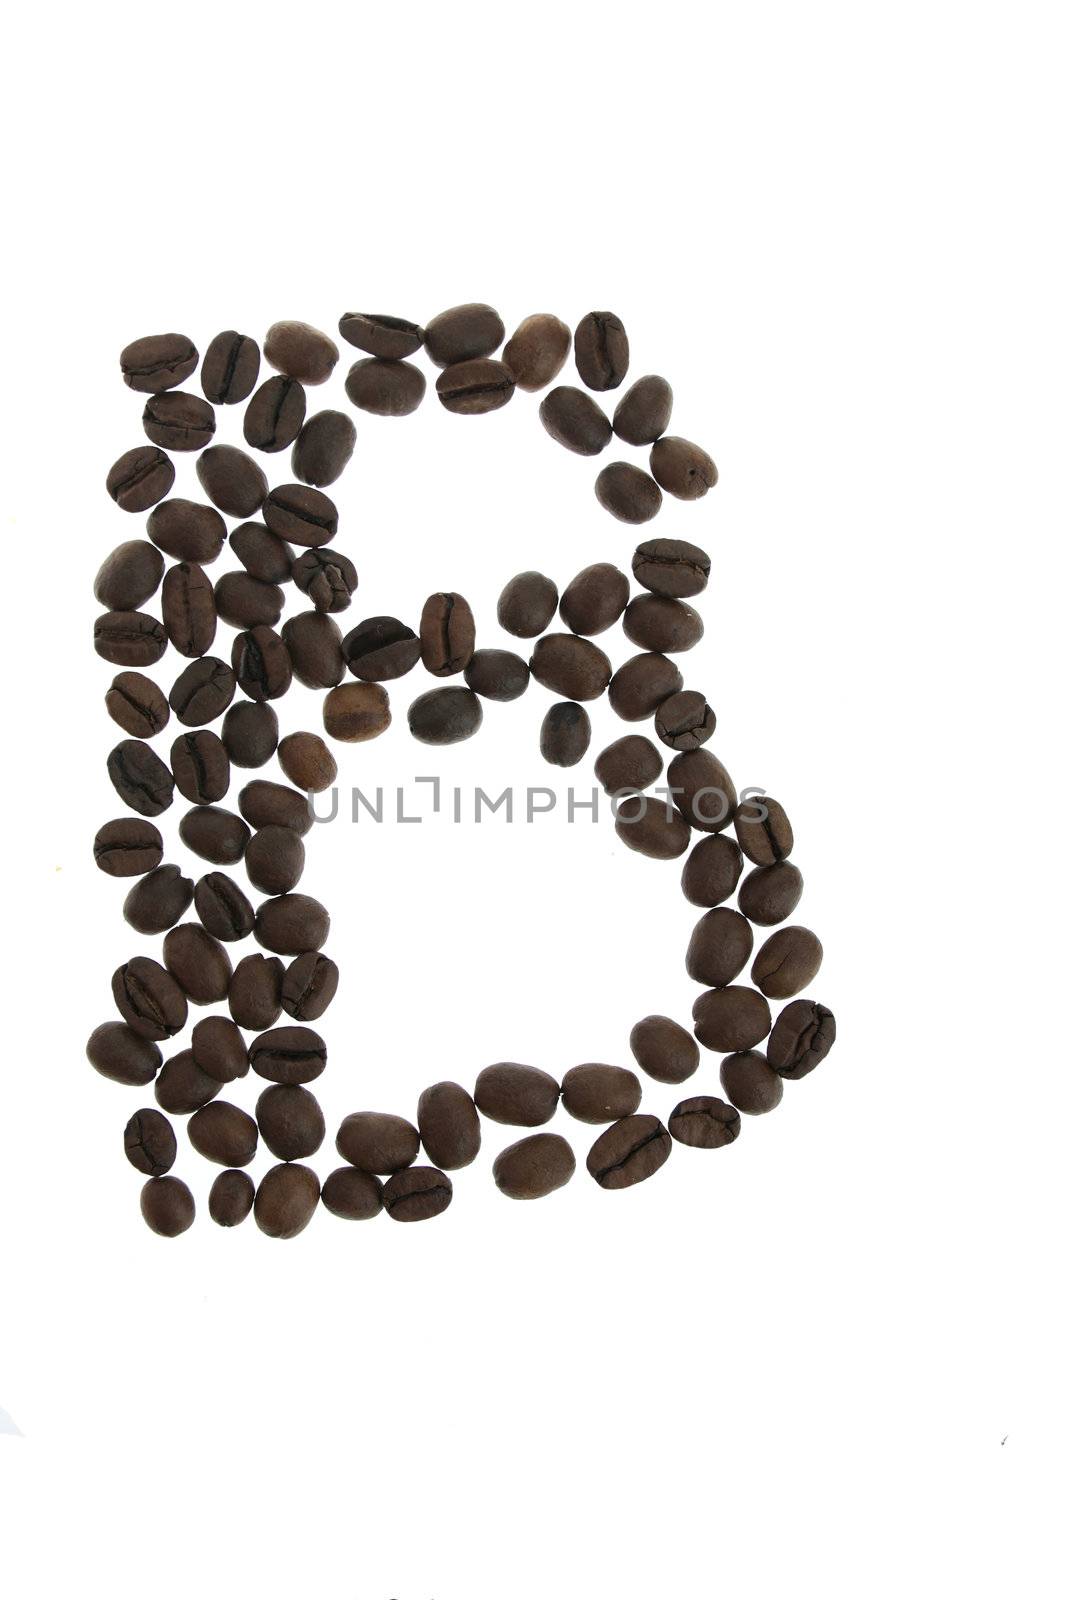 Coffe letter B by BDS